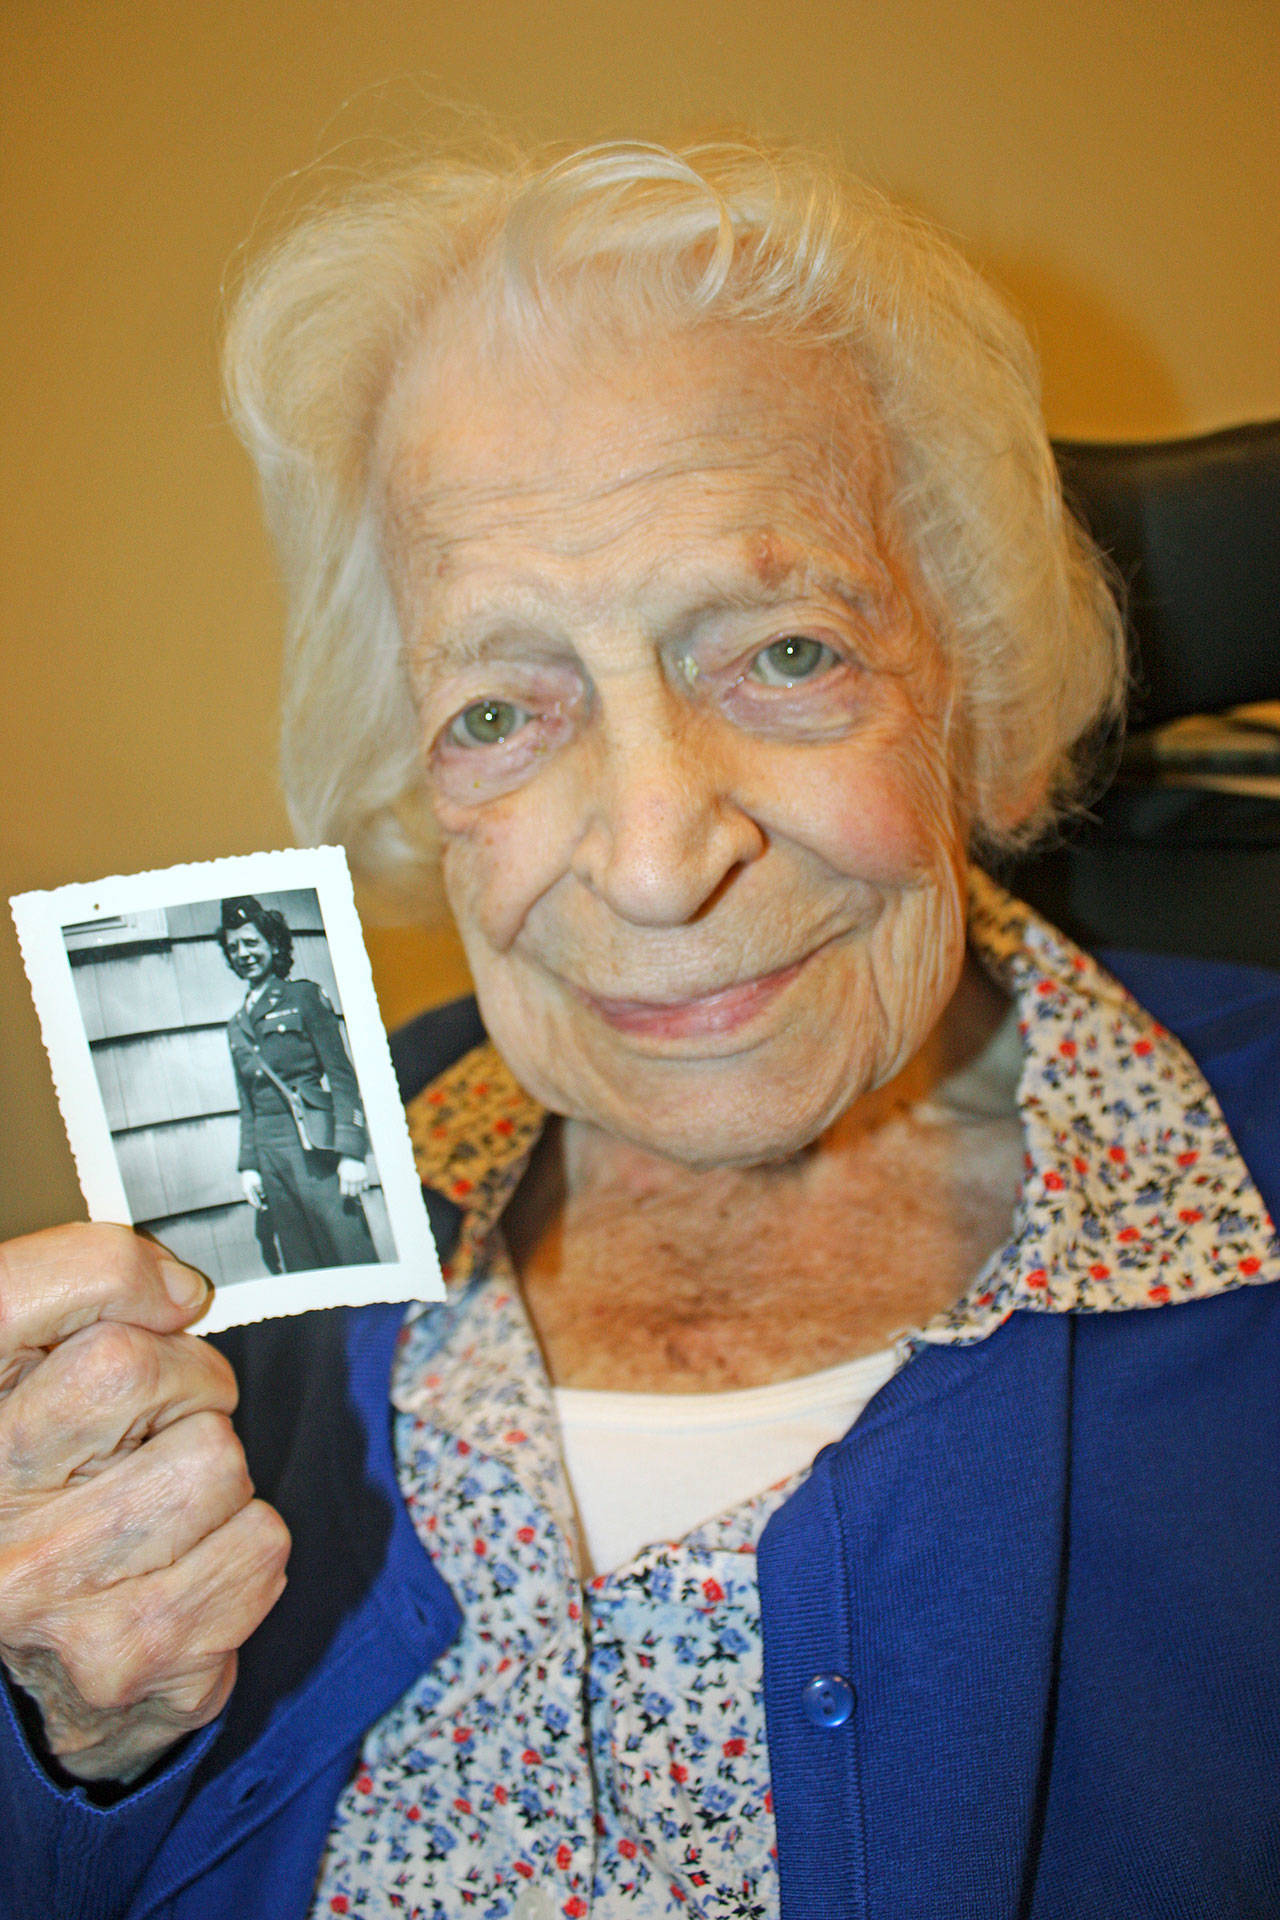 Then and now: Annie McDonald was a 24-year-old U.S. Army nurse when she began serving near the battlefields of Europe in World War II. McDonald, who grew up in Auburn, turns 100 years old on Saturday. MARK KLAAS, Auburn Reporter